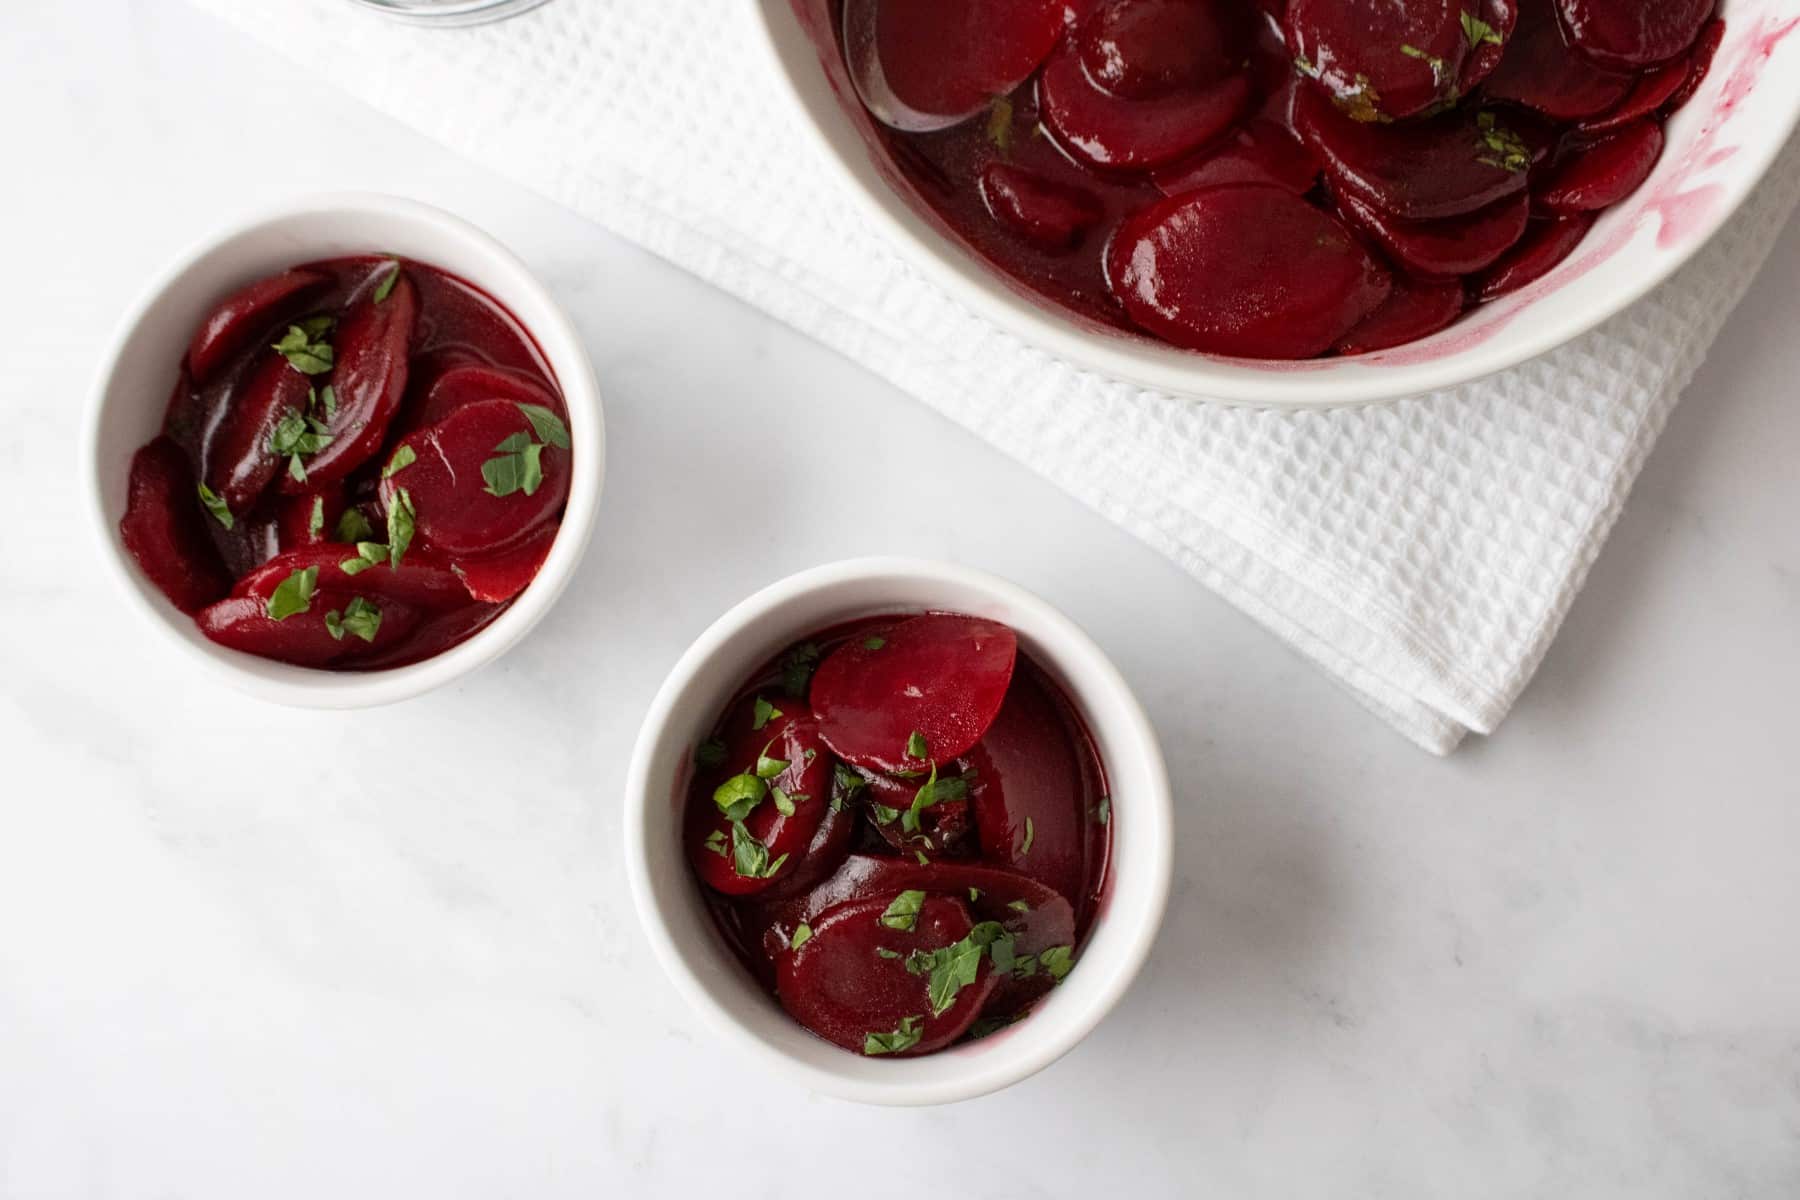 Horizontal picture of small and large bowls of Harvard Beets. 